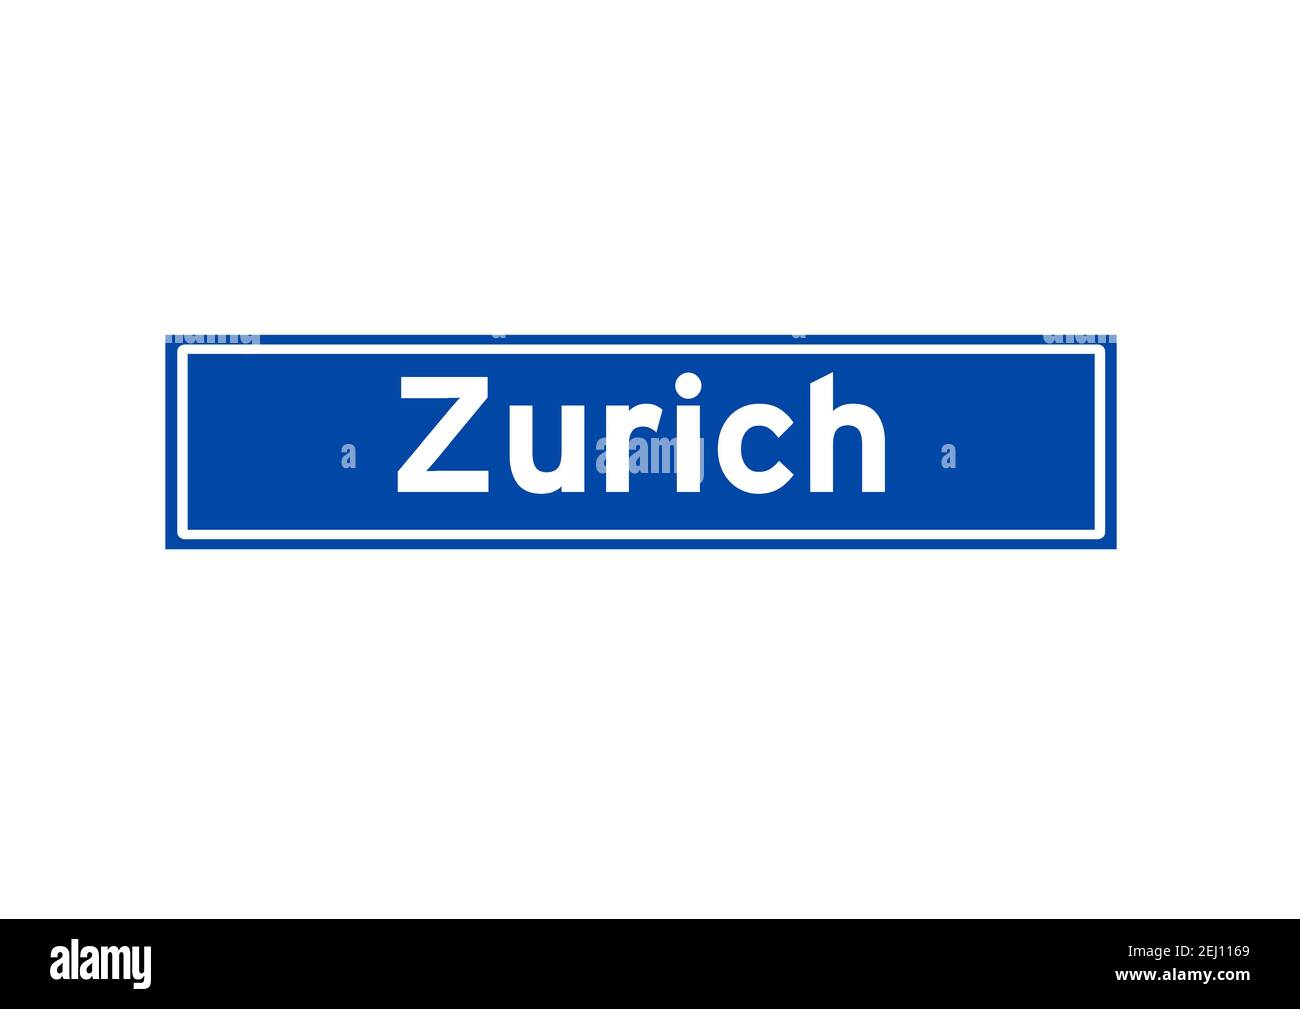 Zurich isolated Dutch place name sign. City sign from the Netherlands. Stock Photo